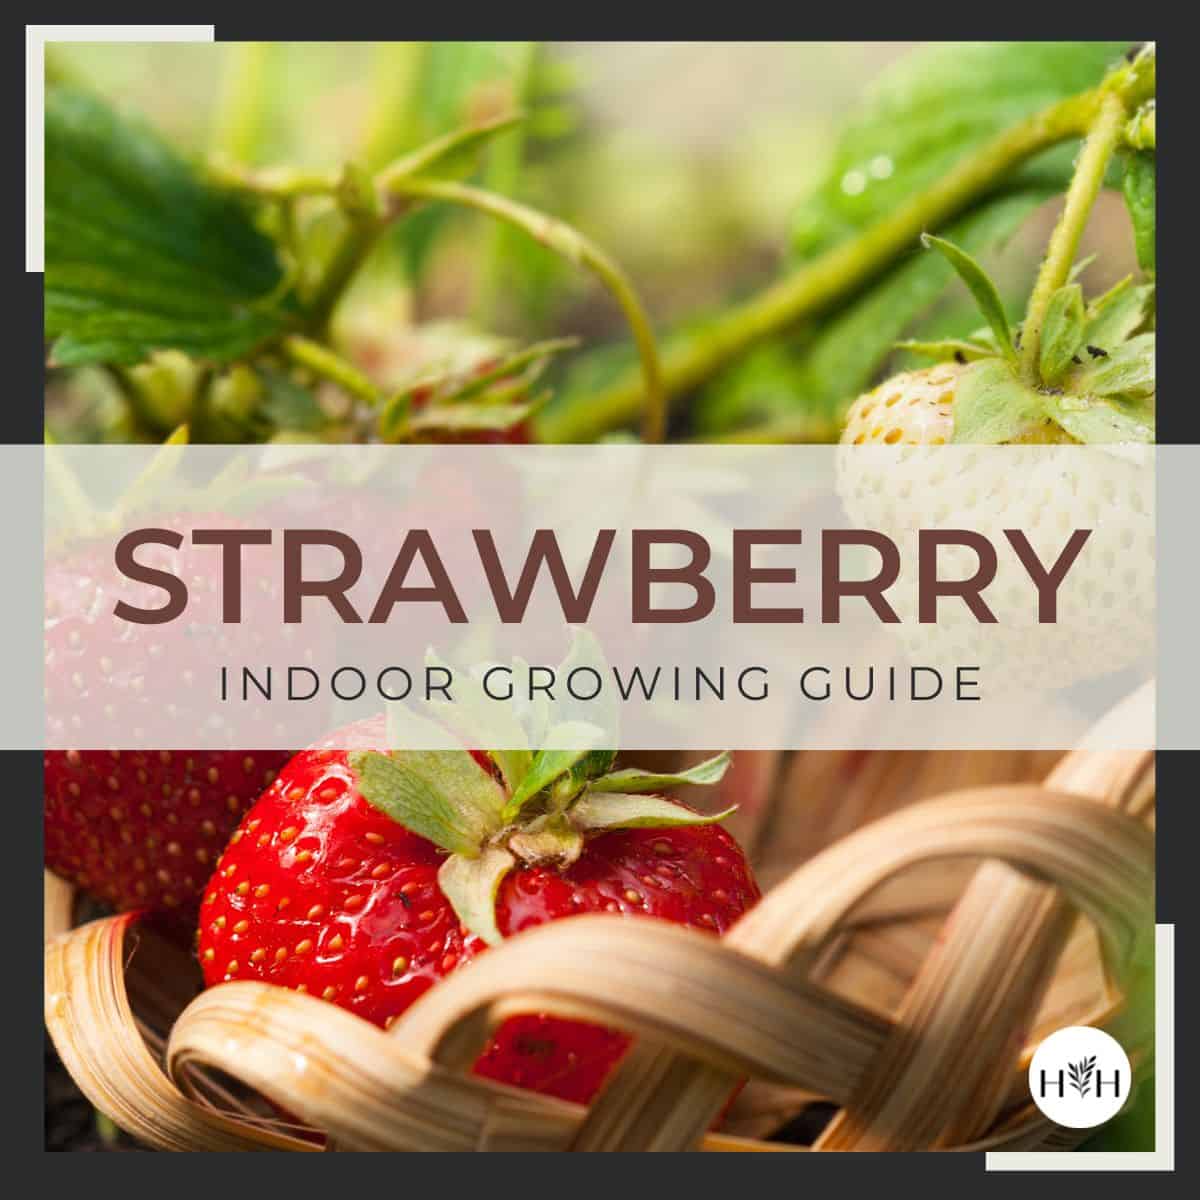 Strawberry indoor growing guide - square size via @home4theharvest